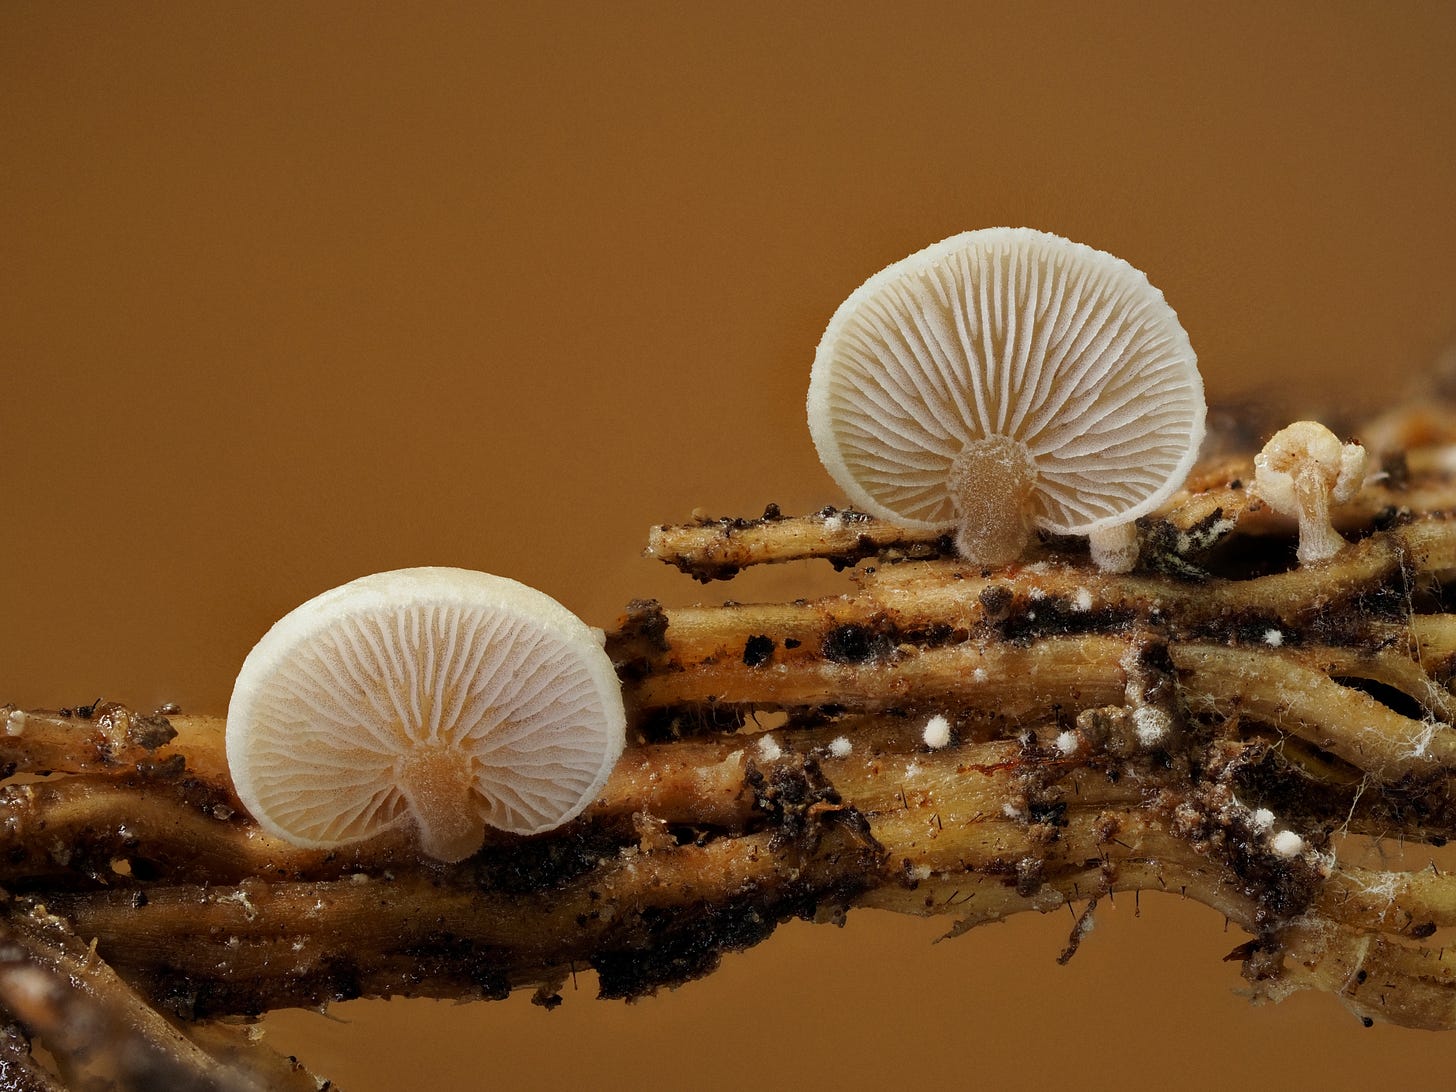 two small oysterling mushrooms